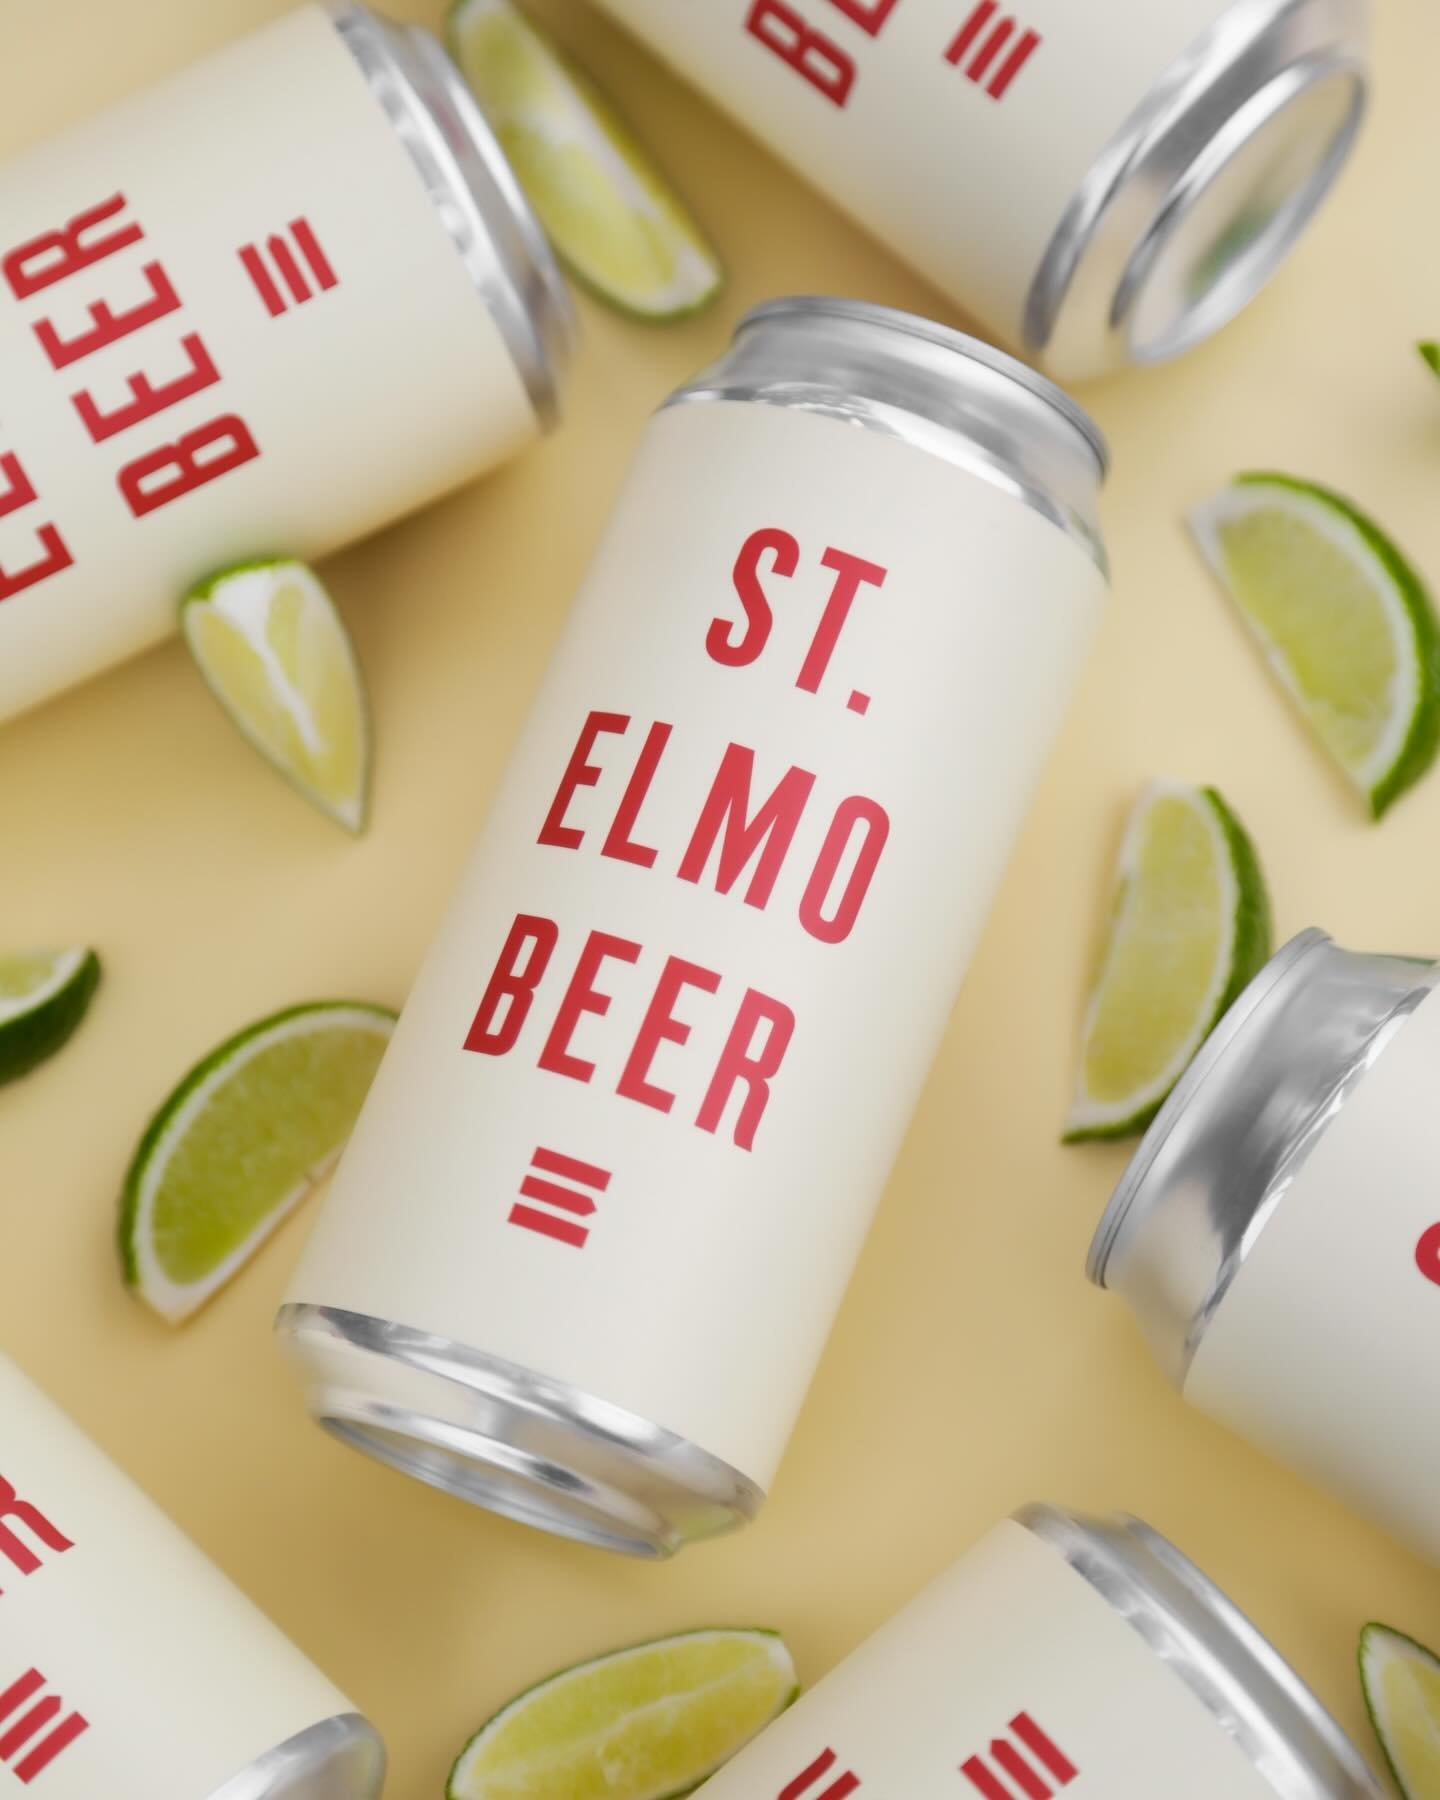 𝗕🌞𝗨🌞𝗘🌞𝗡🌞𝗢⁣
⁣
Our Mexican Lager is back &ndash; tailor-made to be the ultimate summer sipper! Bueno is light, infinitely crushable, and pairs perfectly with a lime wedge garnishing the rim. Add some sass to your glass with a little Taj&iacute